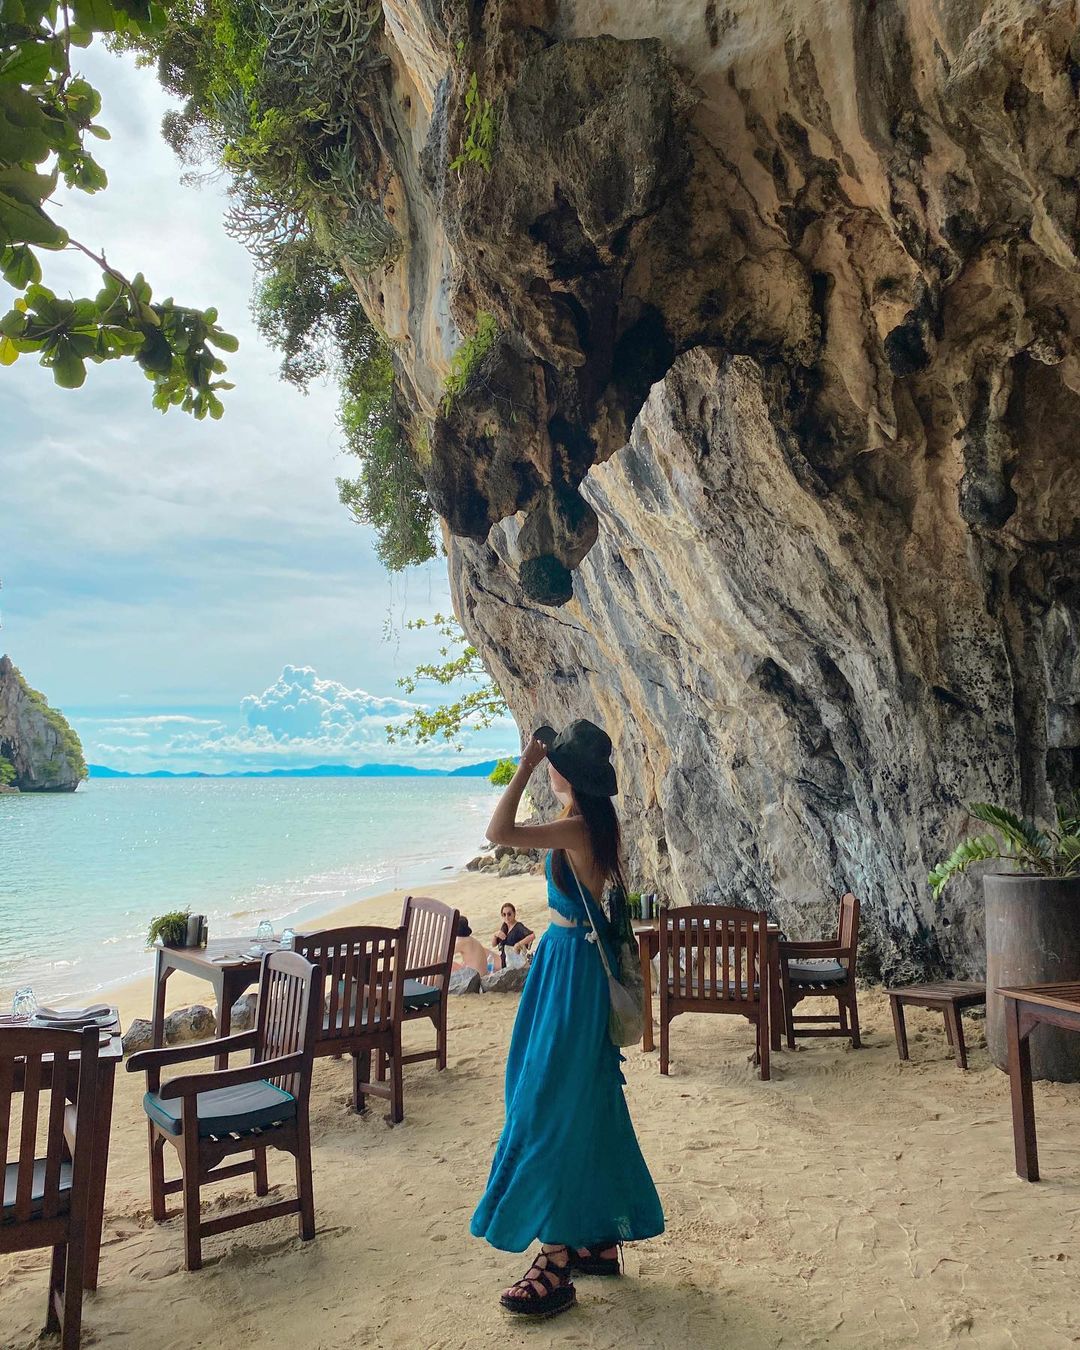 7 Bizzare Foodie Experience The Grotto Limestone Cave Restaurant